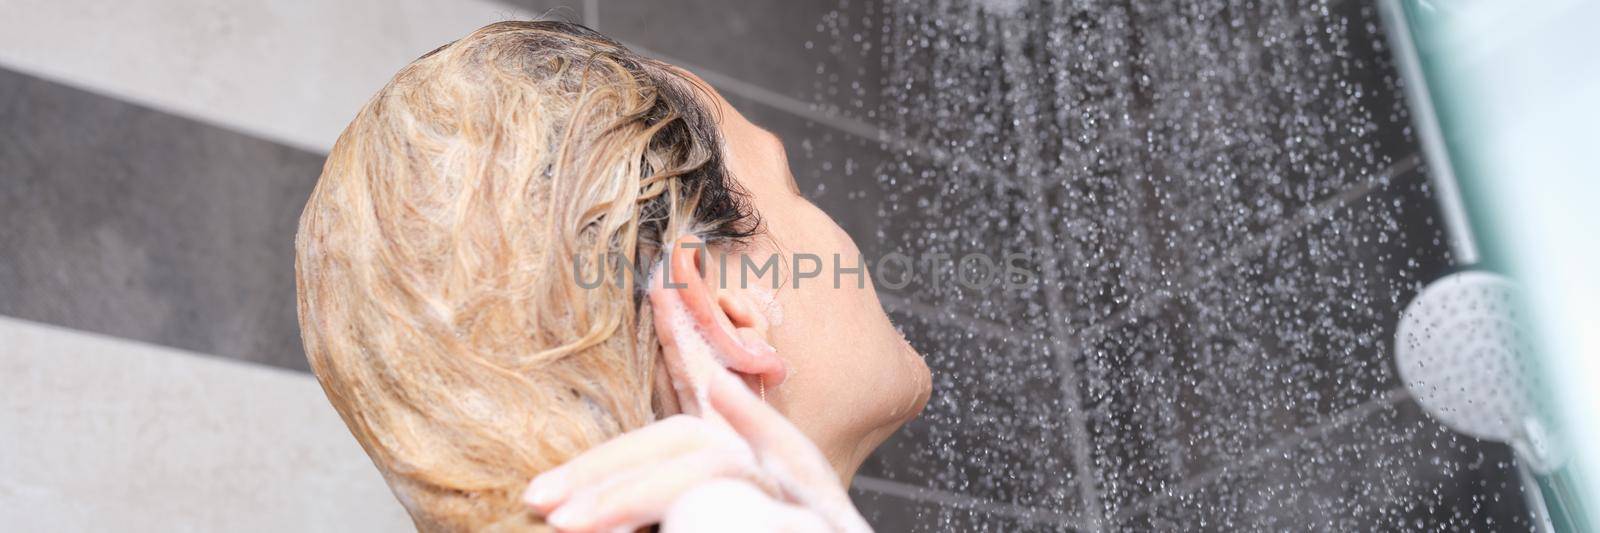 A woman washes her hair with shampoo in the shower by kuprevich